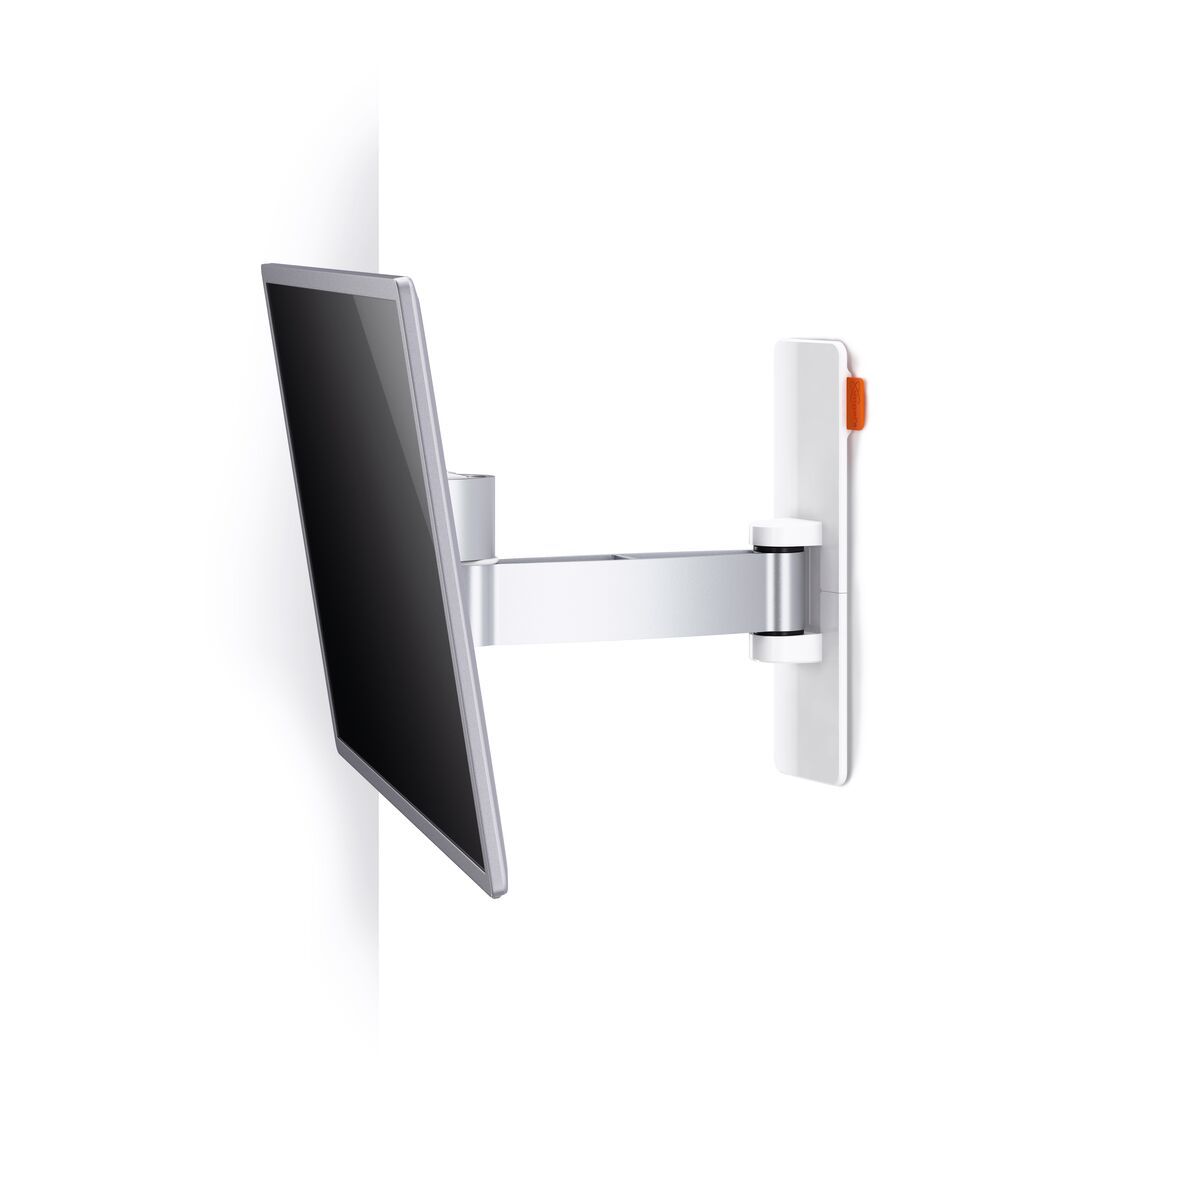 Vogel's WALL 2025 Full-Motion TV Wall Mount (white) - Suitable for 17 up to 26 inch TVs - Motion (up to 120°) - Tilt -10°/+10° - Detail